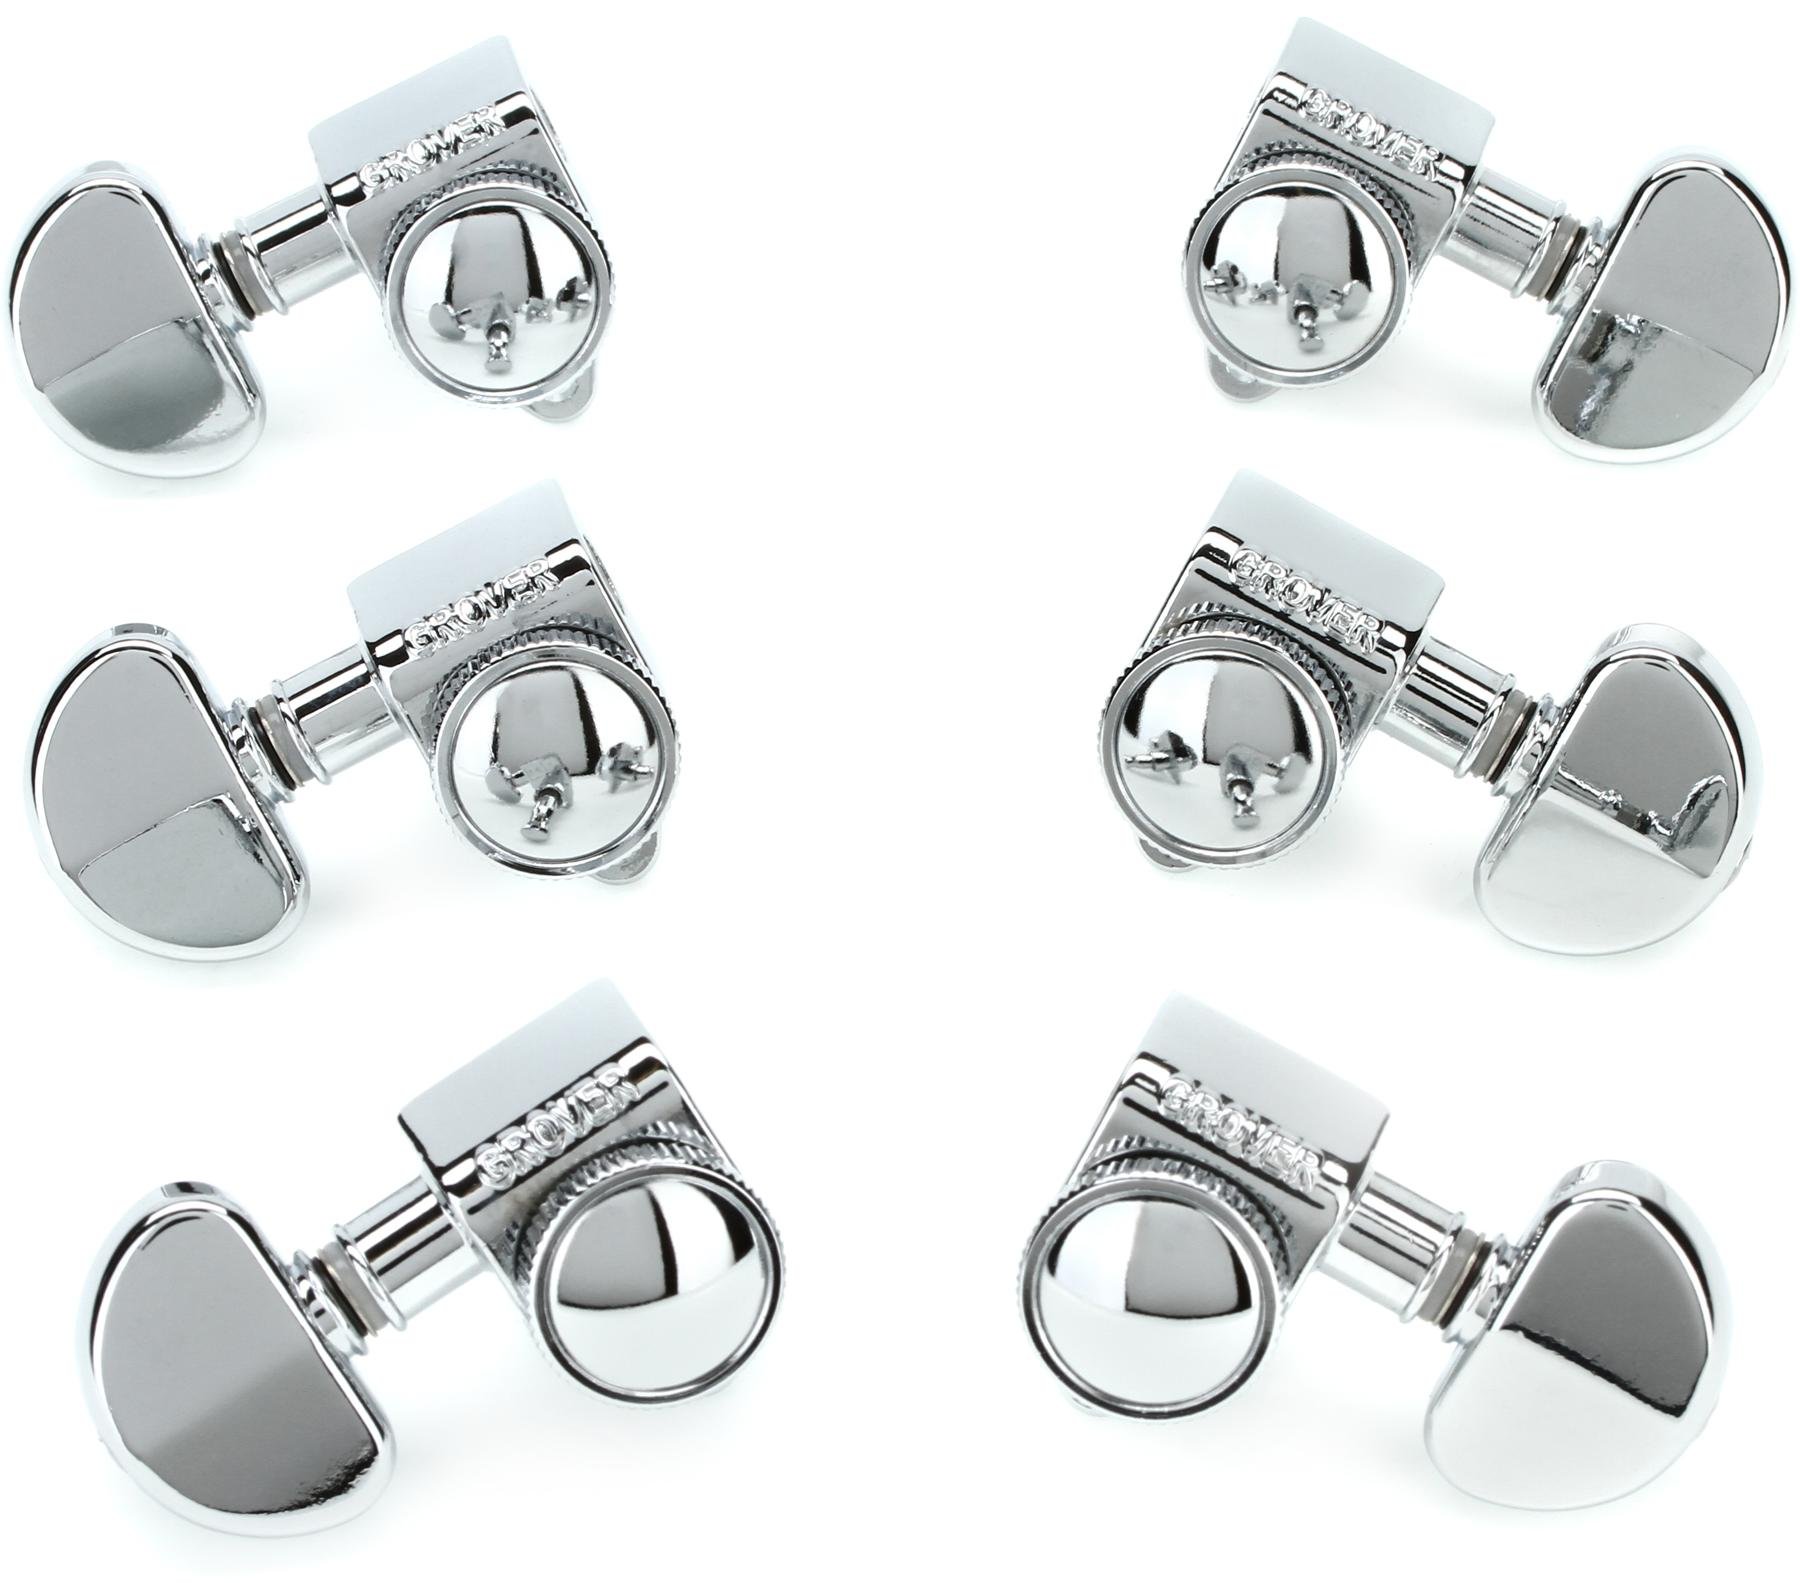 Grover 502C Roto-Grip Locking Rotomatic Tuners - 3+3 Chrome | Sweetwater